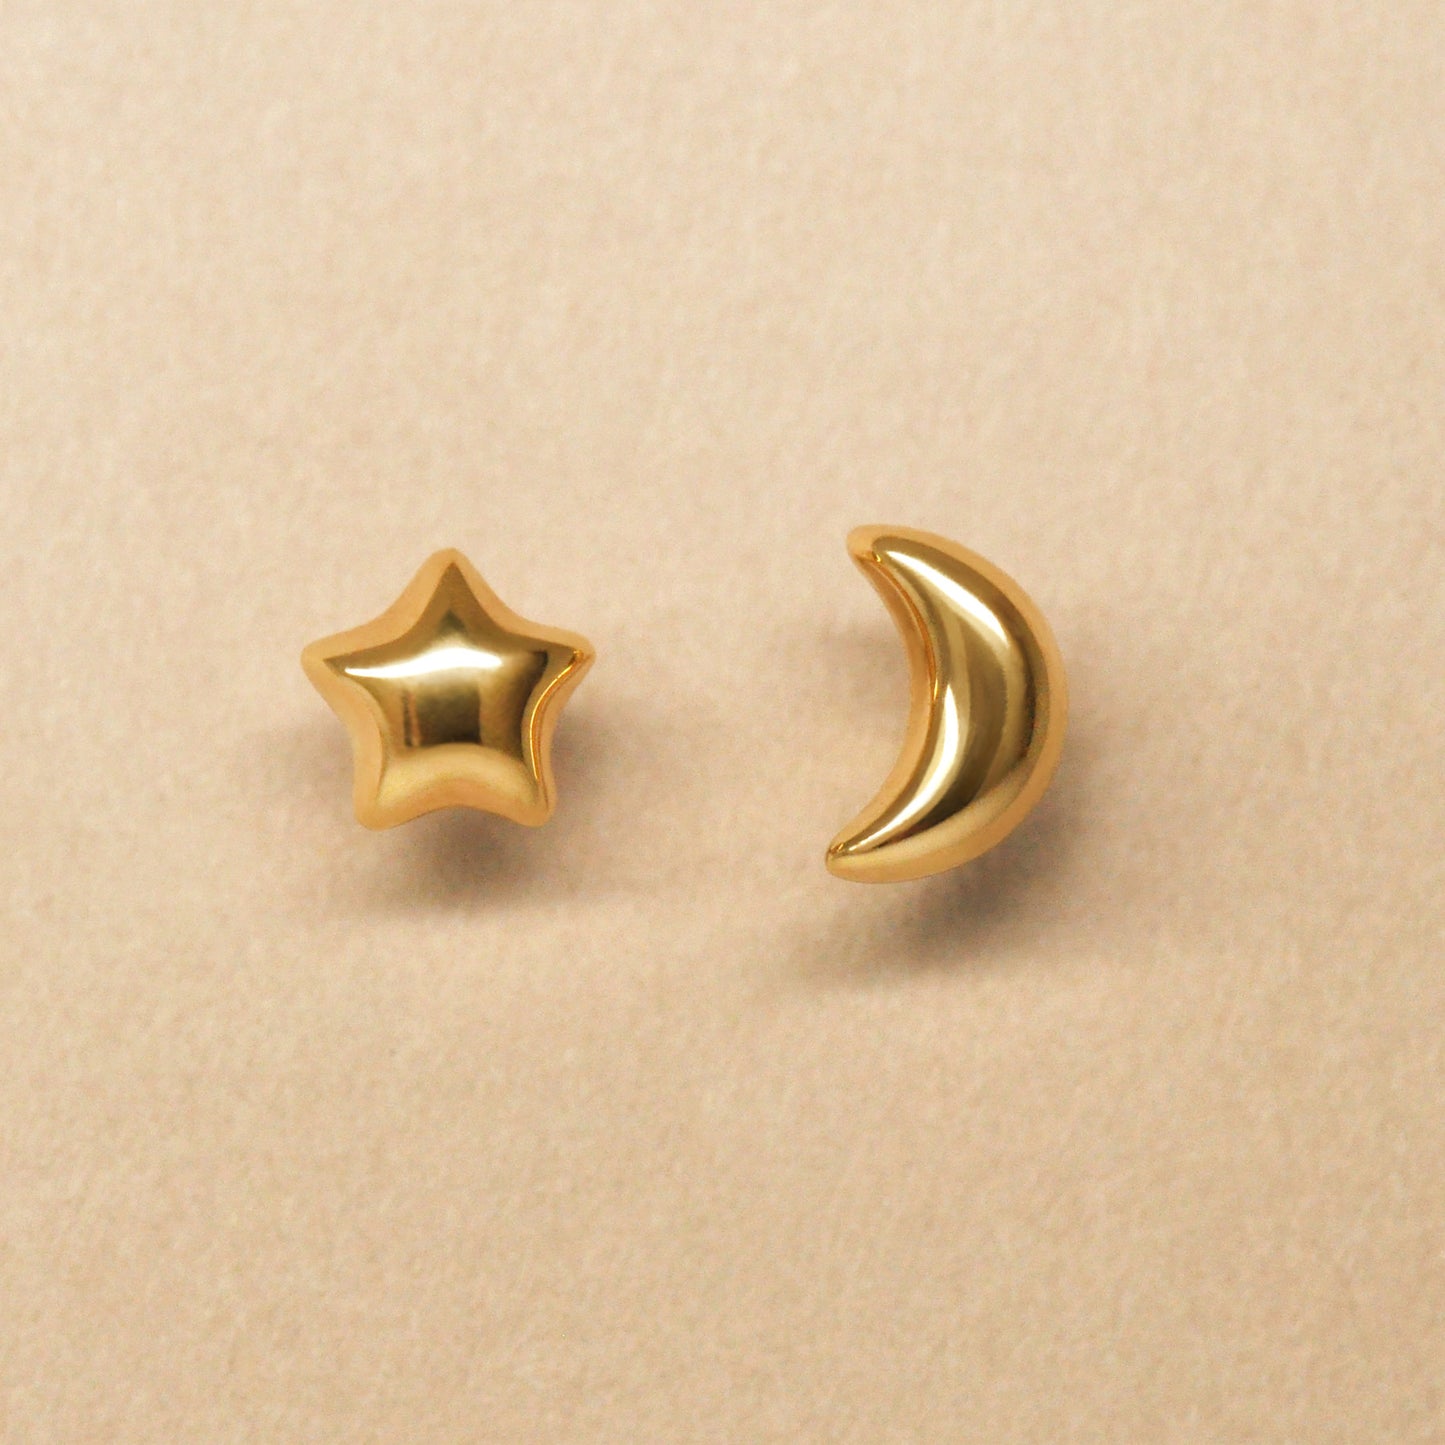 [Second Earrings] 18K Yellow Gold Moon & Star Earrings - Product Image